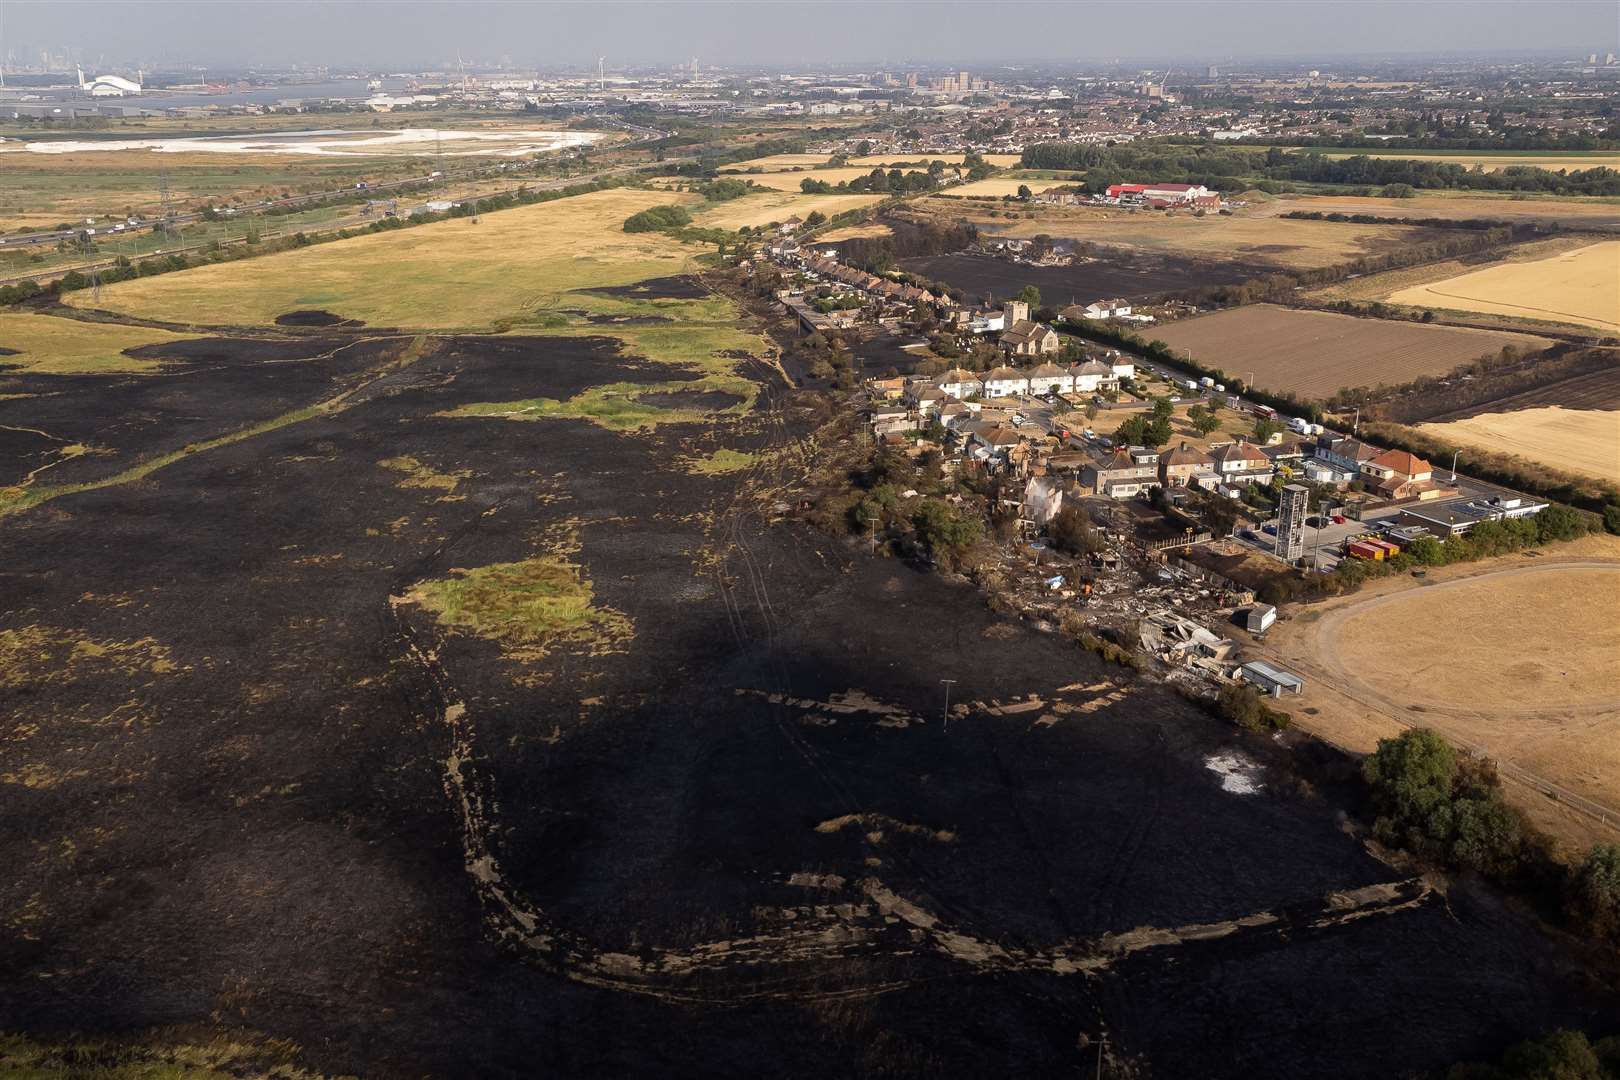 Aerial view of burned fields and properties after the blaze in Wennington, east London in July (Aaron Chown/PA)